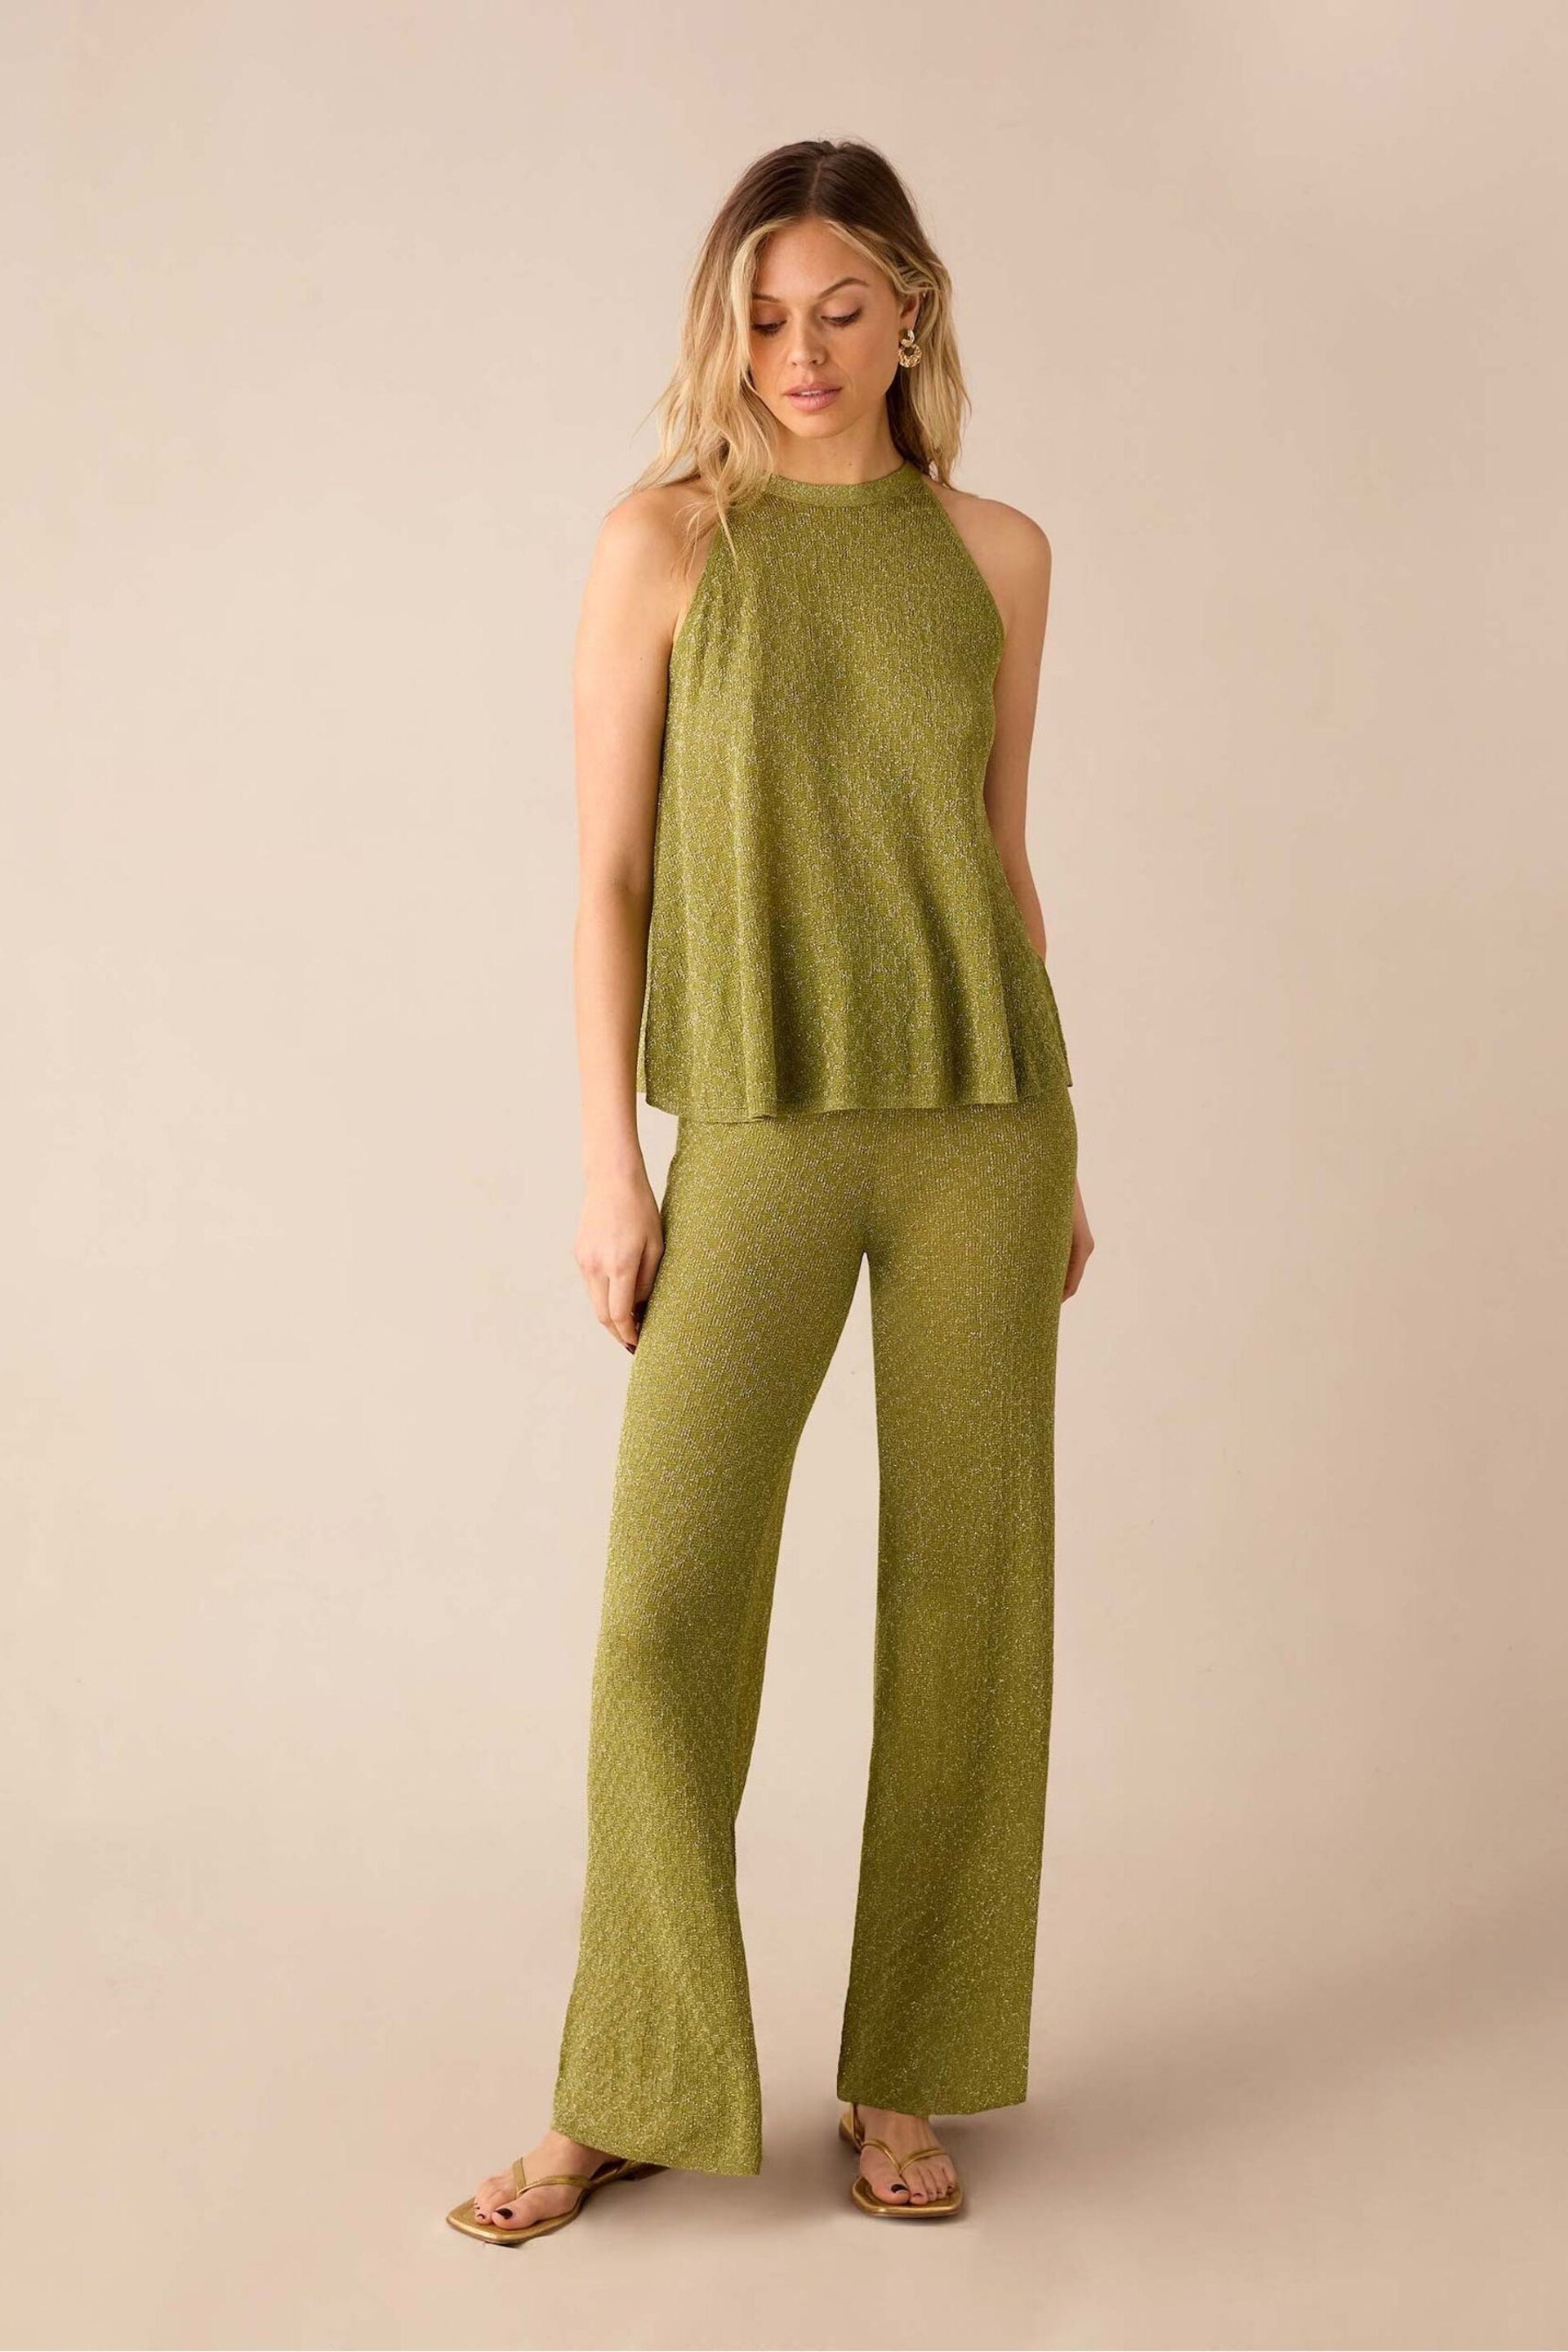 Ro&Zo Green Sheer Sparkle Knit Flared Trousers - Image 3 of 7